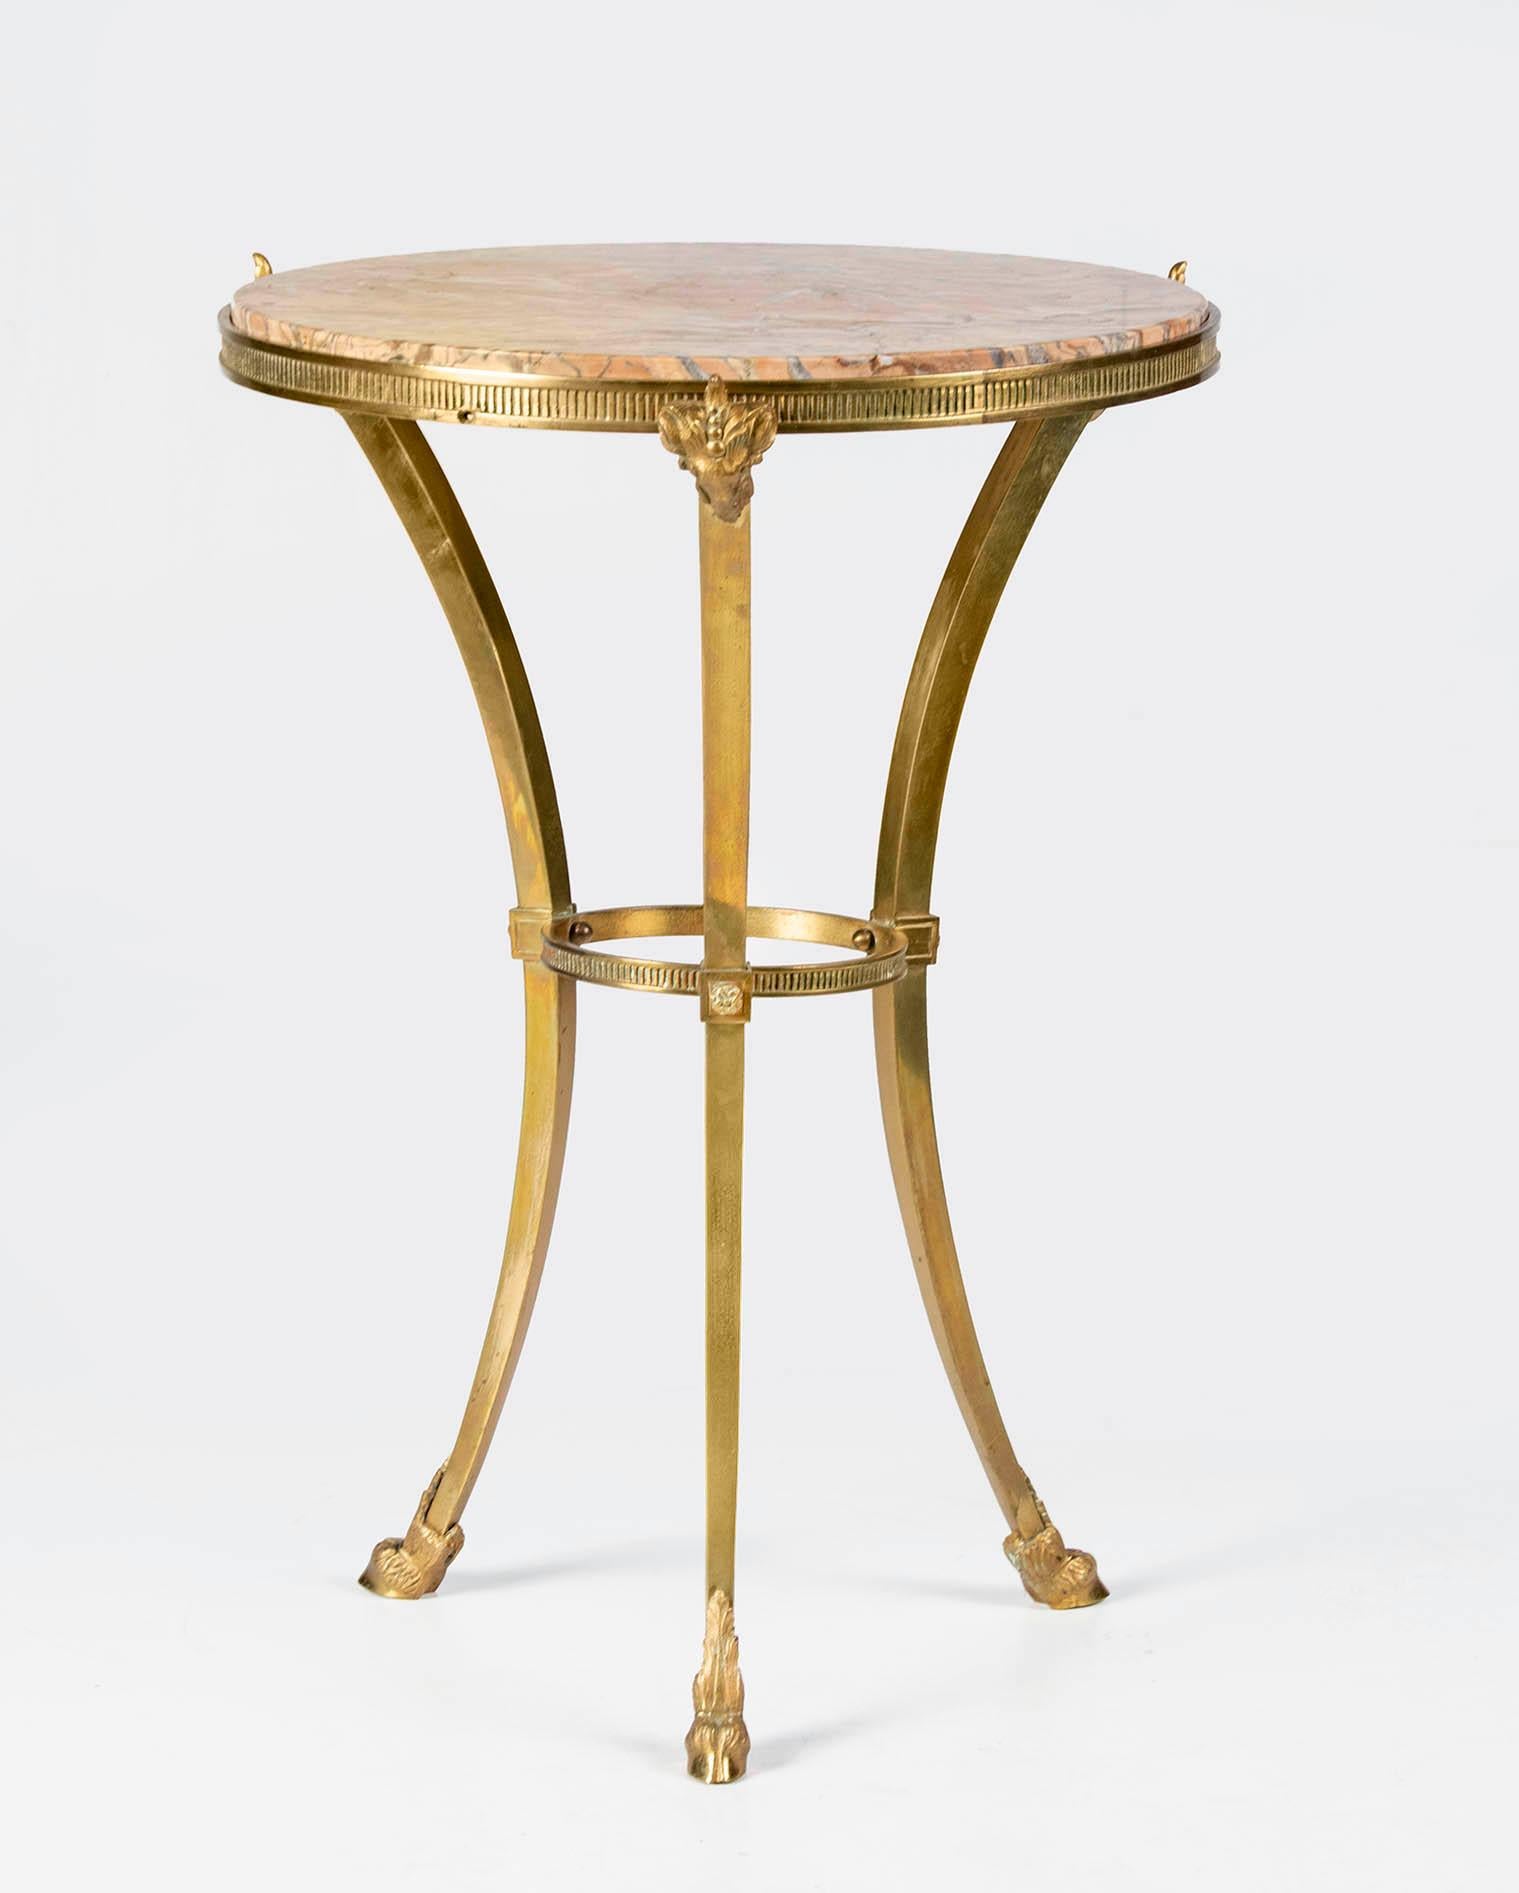 An elegant side table in Maison Jansen style in French Napoleon III style. The base is a solid bronze tripod. Embellished with mercury gilded bronze ram's heads and legs. On the top a pink marble. The pink marble combines beautifully with the